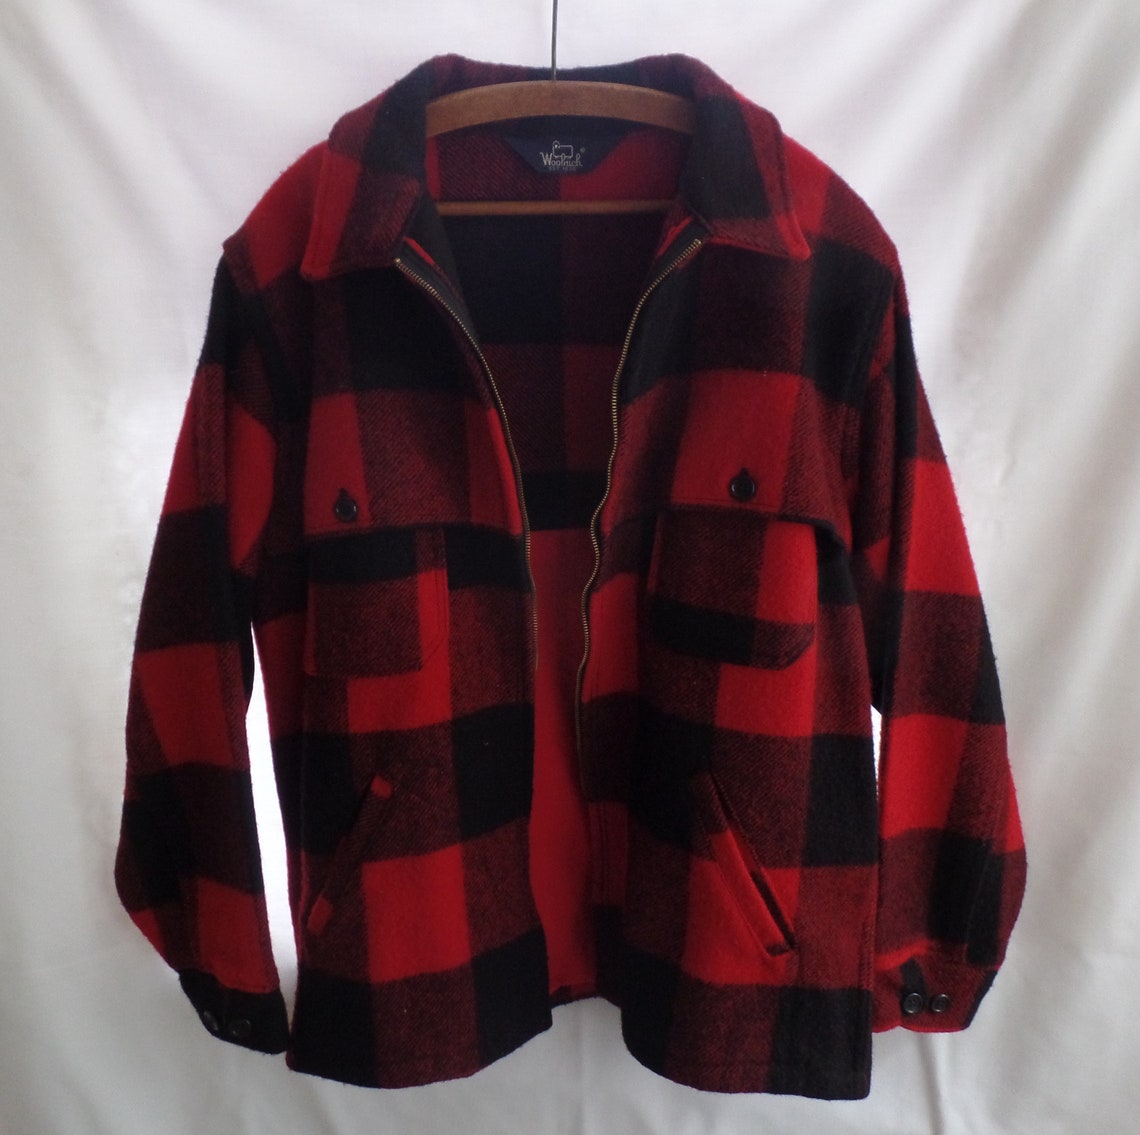 Vintage Buffalo Plaid Woolrich Hunting Jacket Red and Black | Etsy